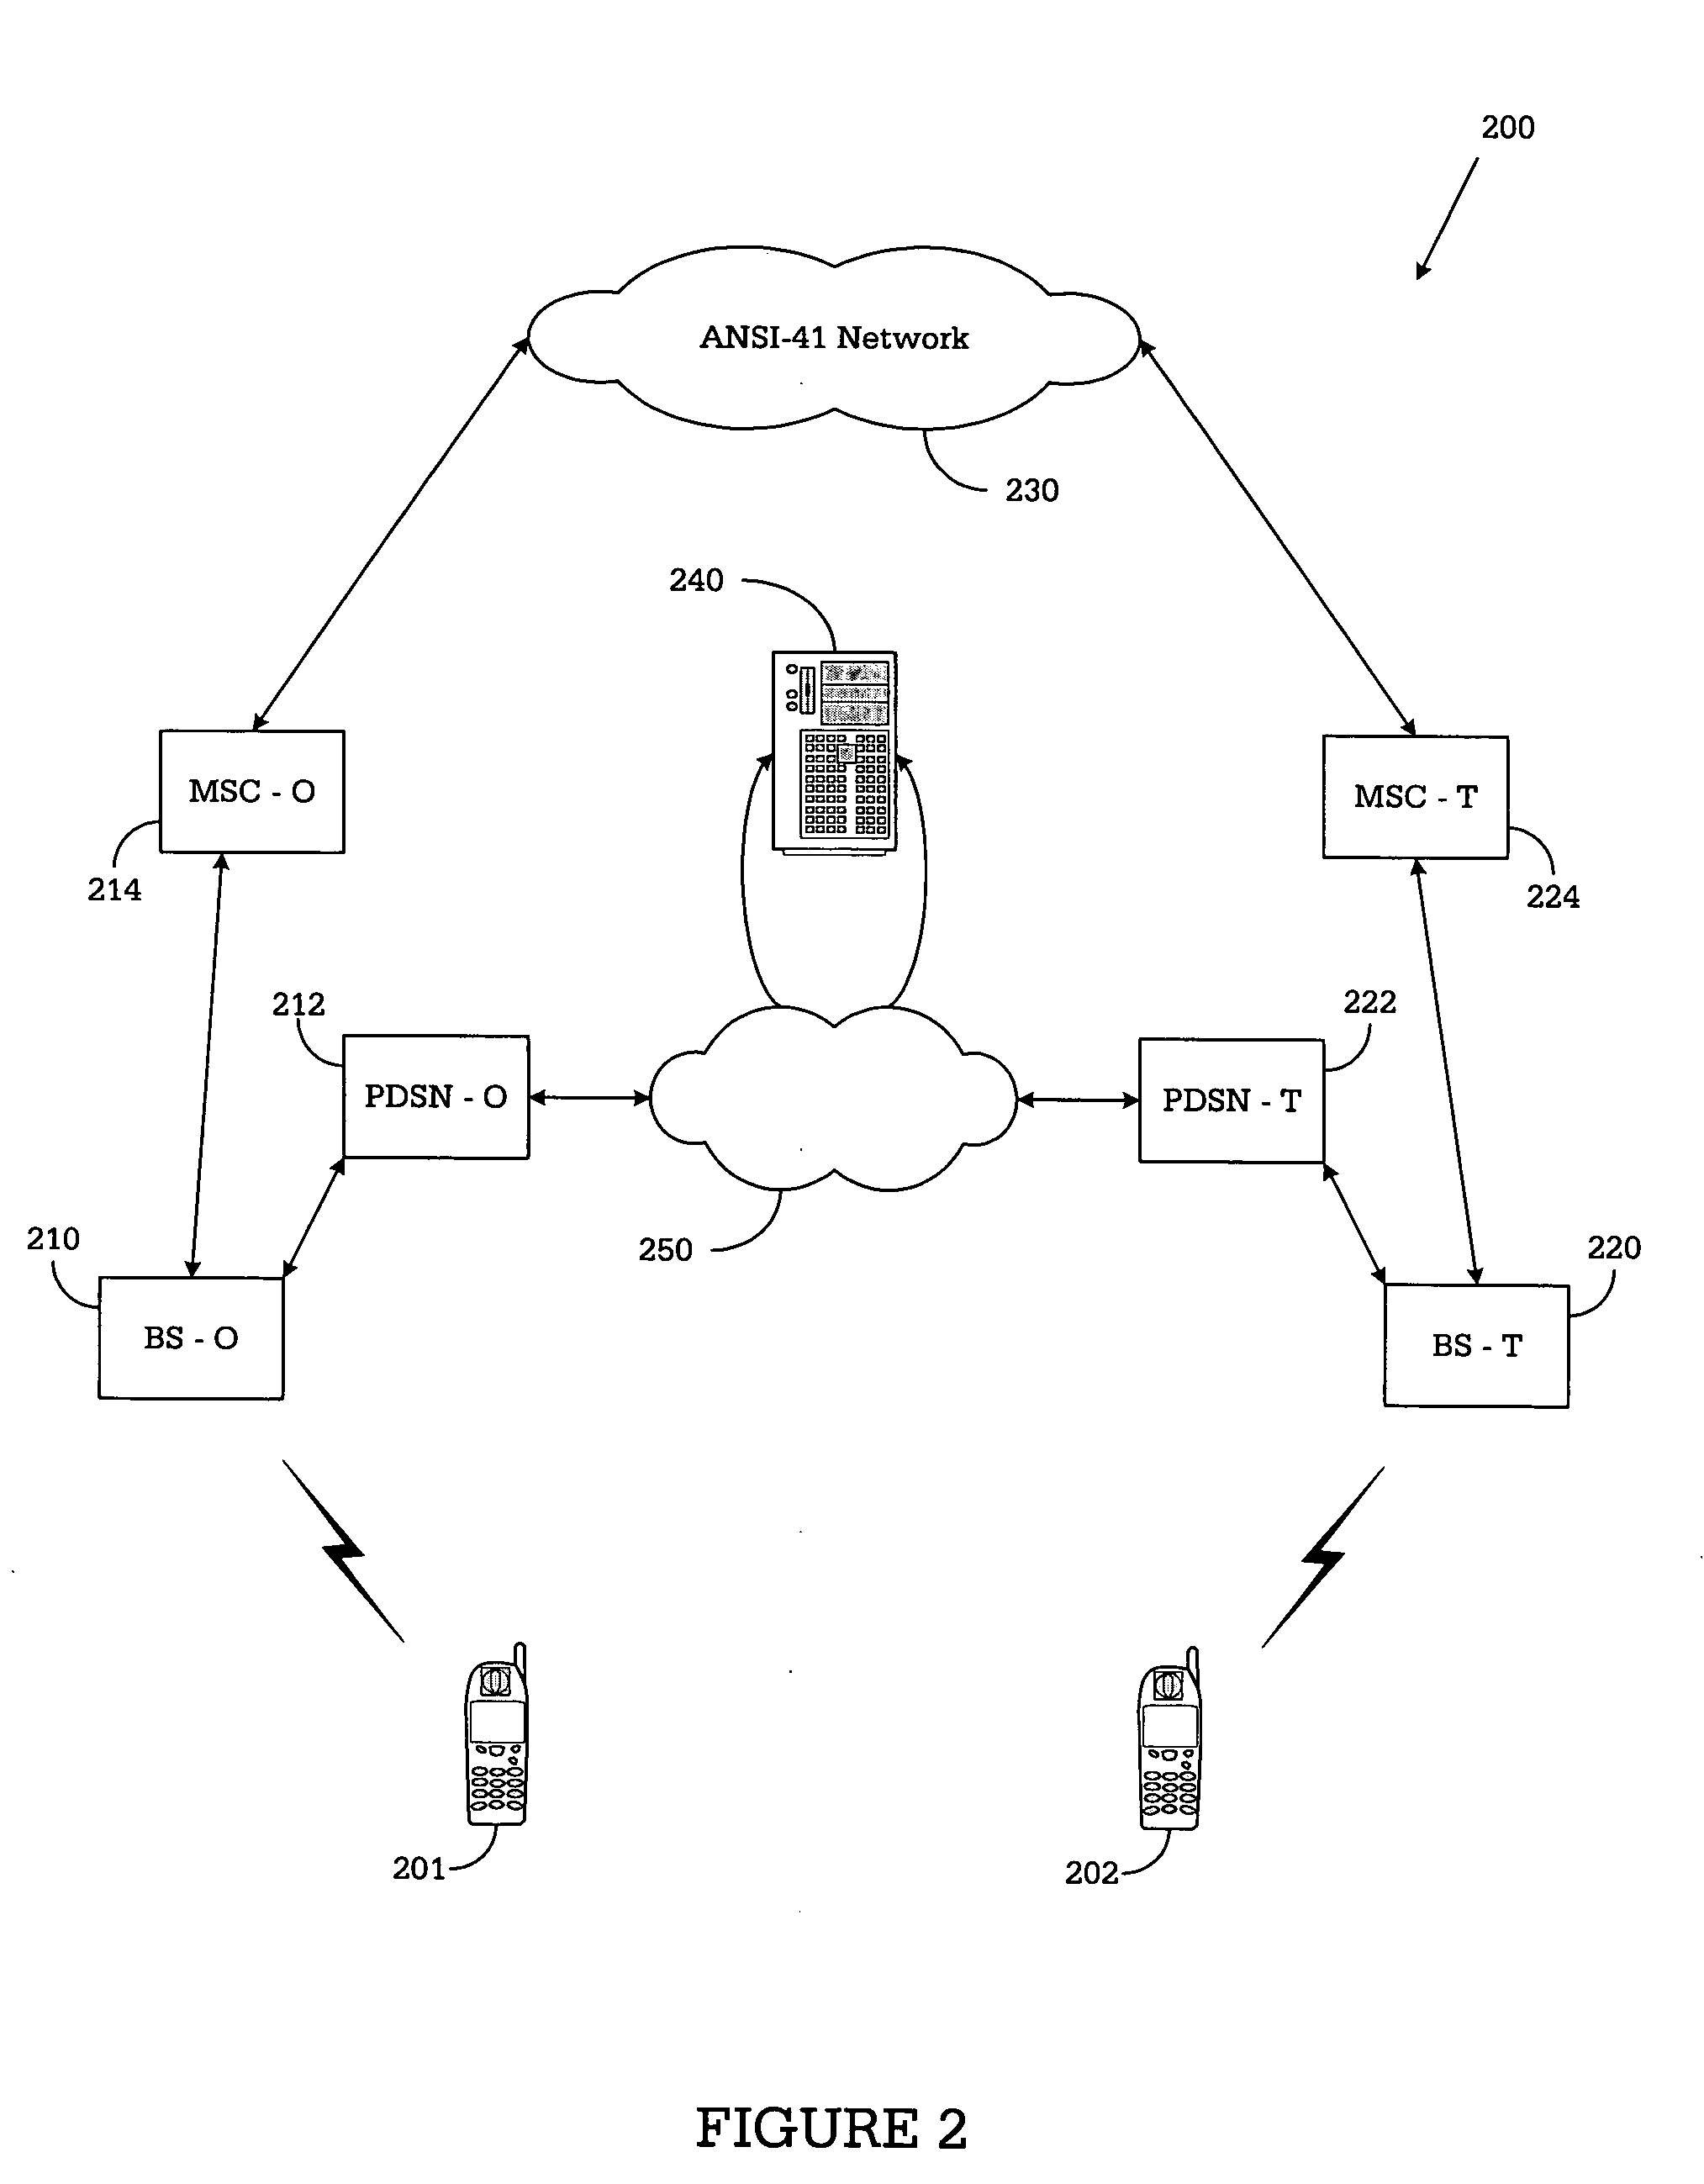 System and method for establishing mobile station-to-mobile station packet data calls between mobile stations in different wireless networks